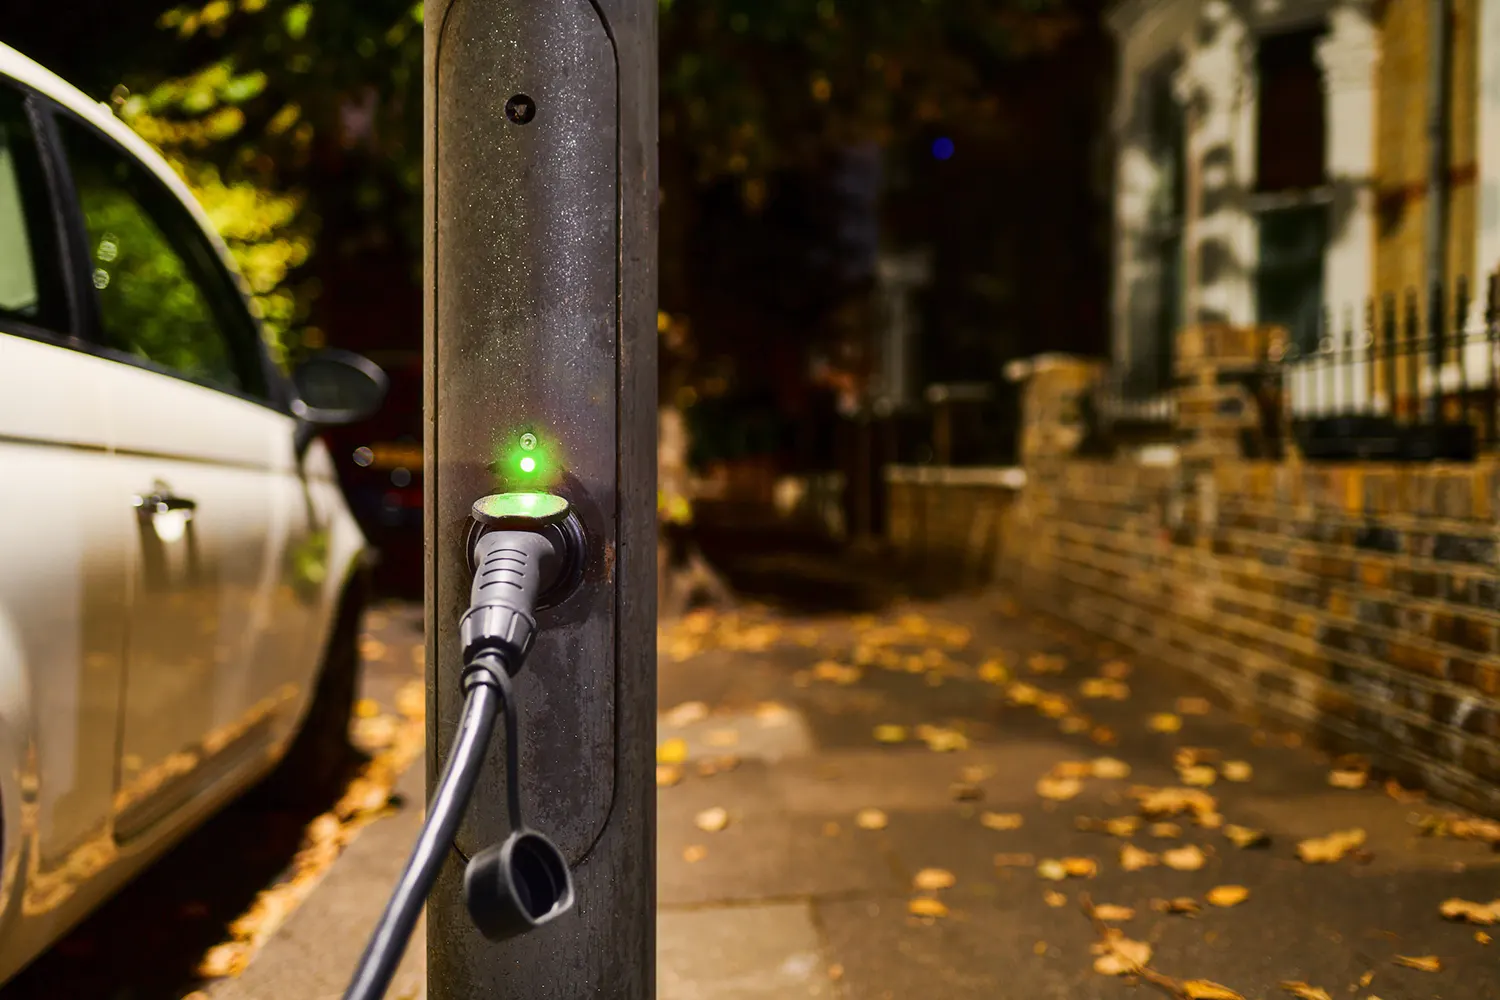 An ubitricity EV lamppost charge point in Richmond and Wandsworth, London